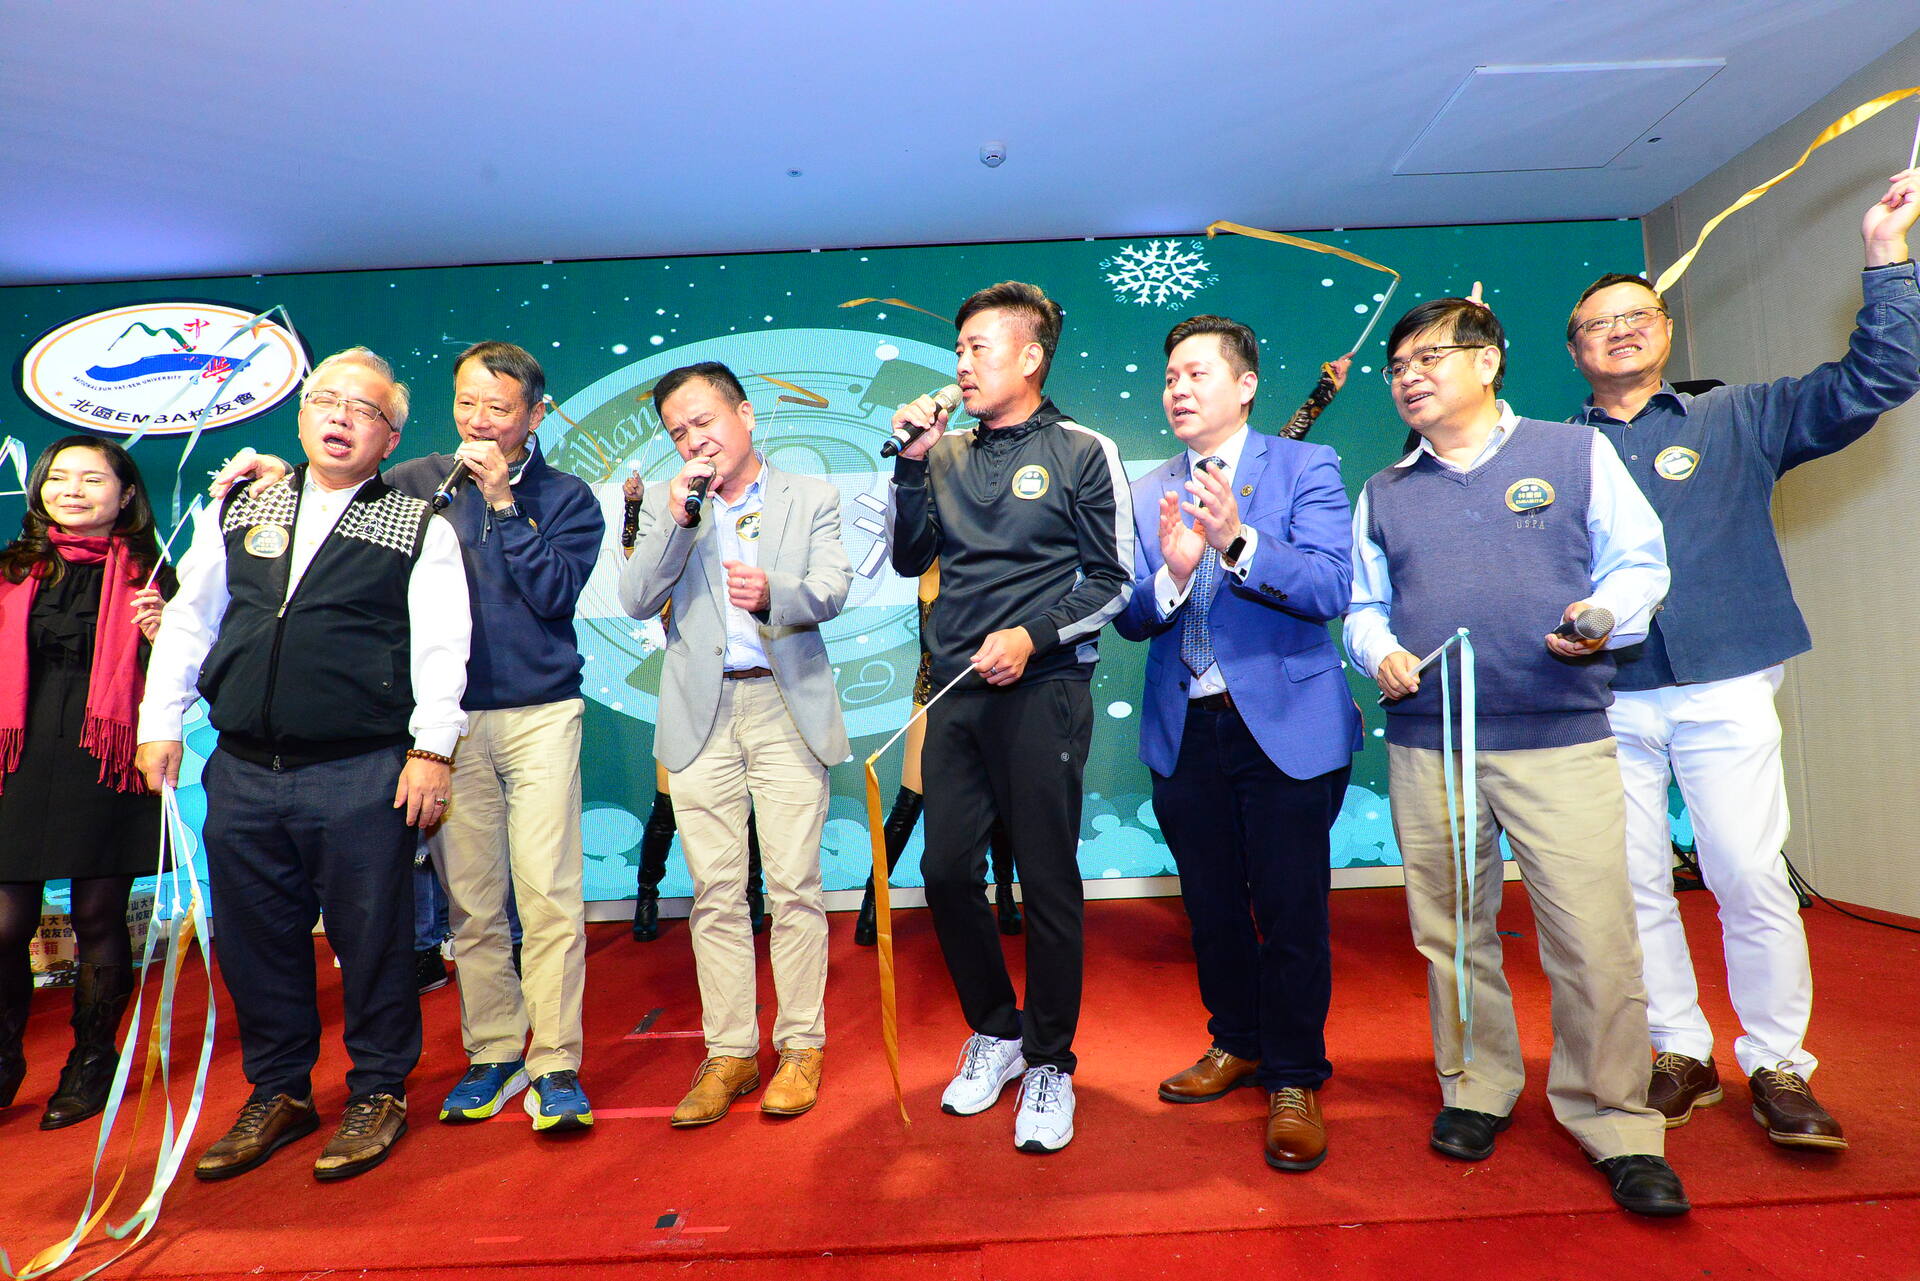 North E Alumni Association President Chun-wen Wang, EMBA CEO Hao-chieh Lin, and special guests singing and having a good time